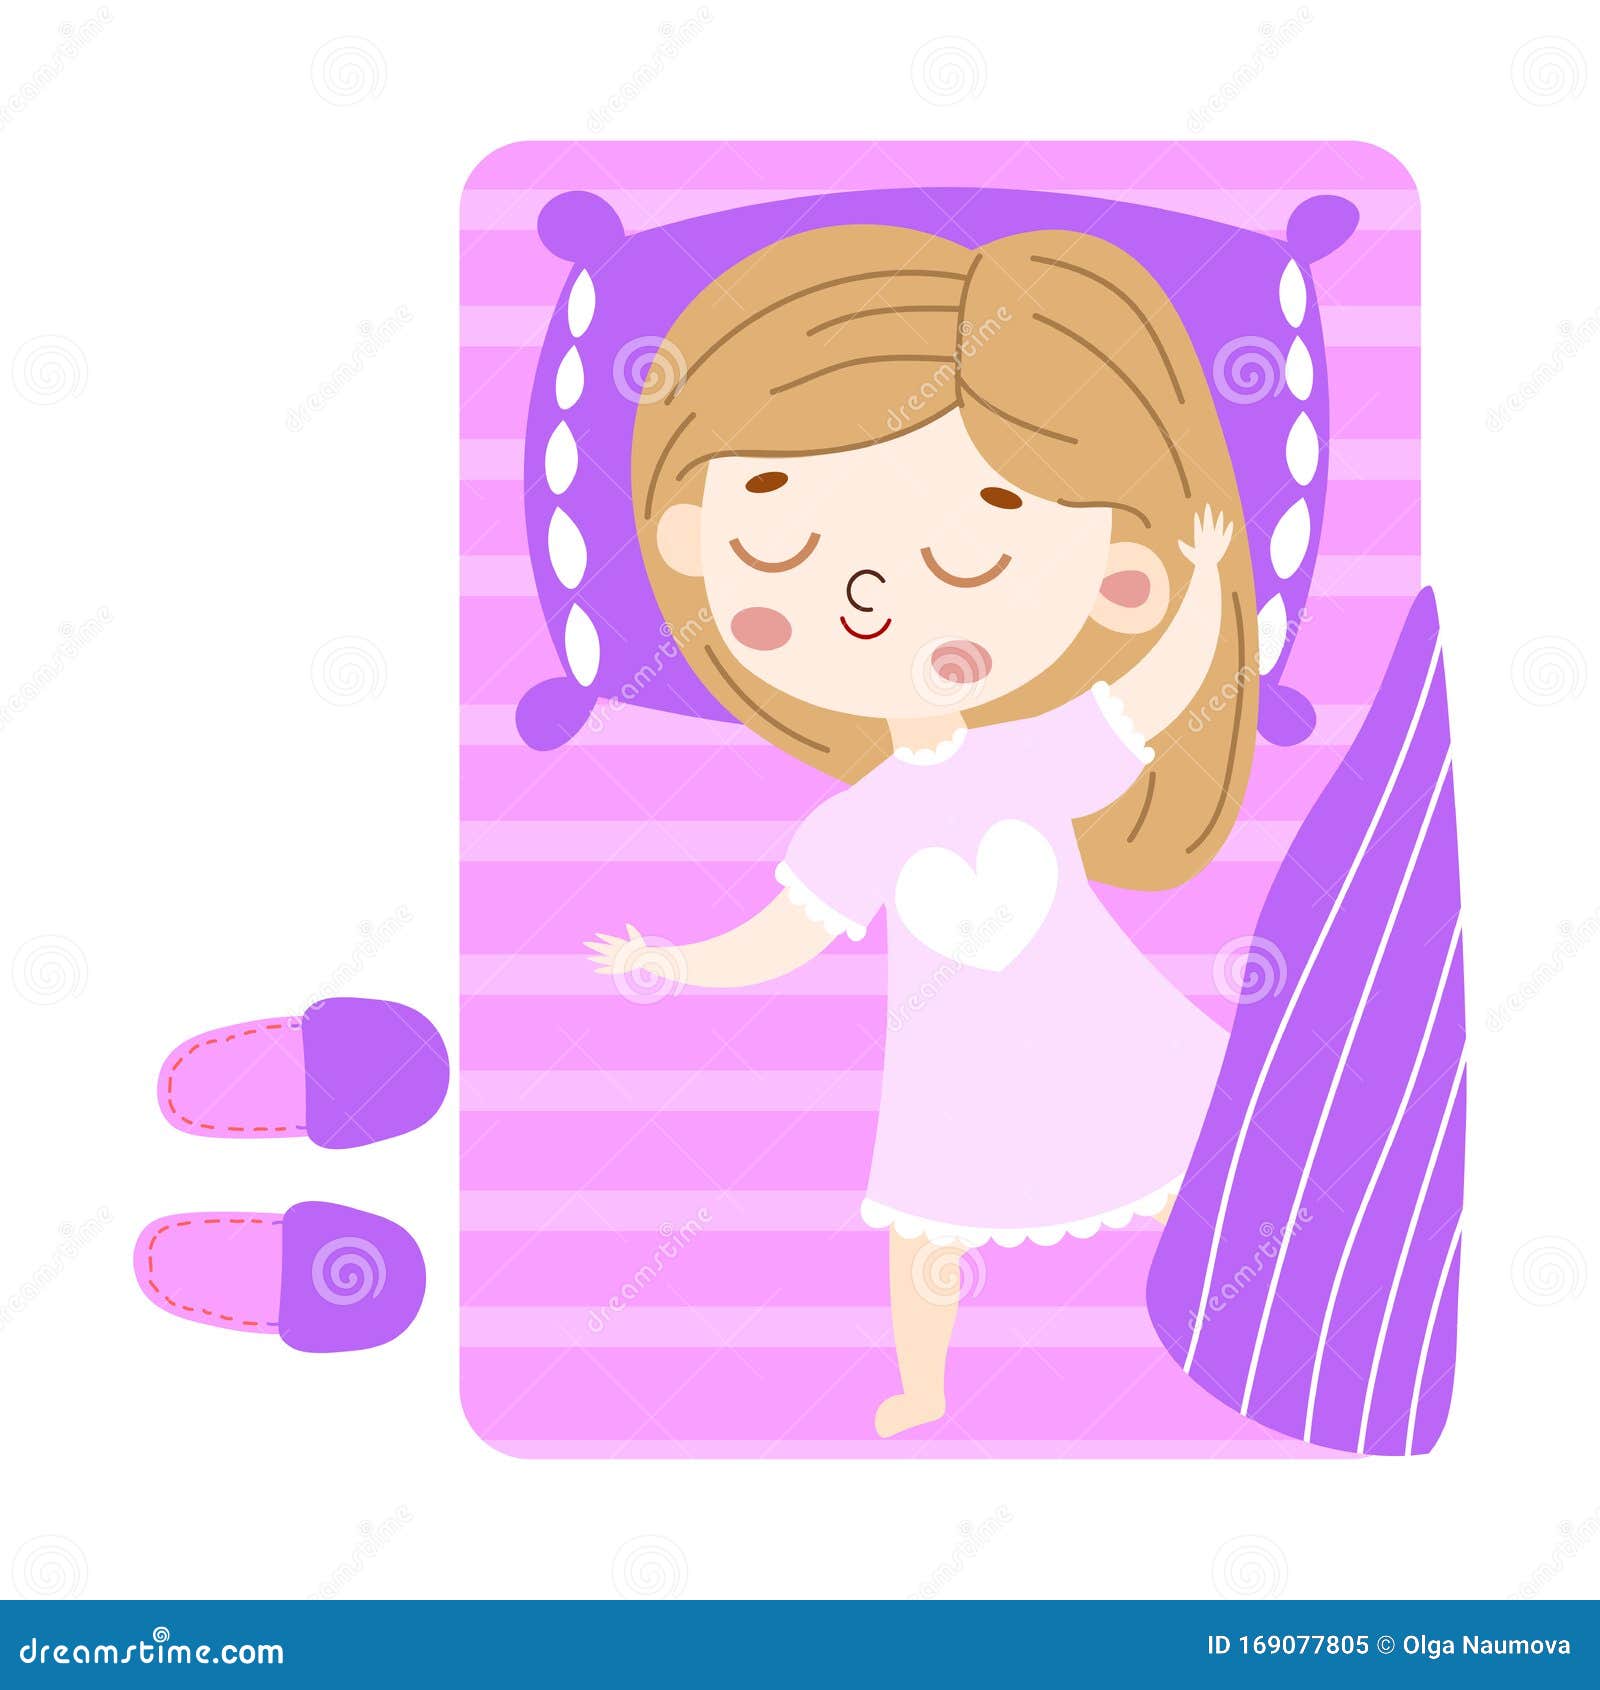 Cute Light-haired Little Girl Lovely Sleeping in Purple Bed Top View.  Vector Illustration in Flat Cartoon Style. Stock Vector - Illustration of  concept, girl: 169077805